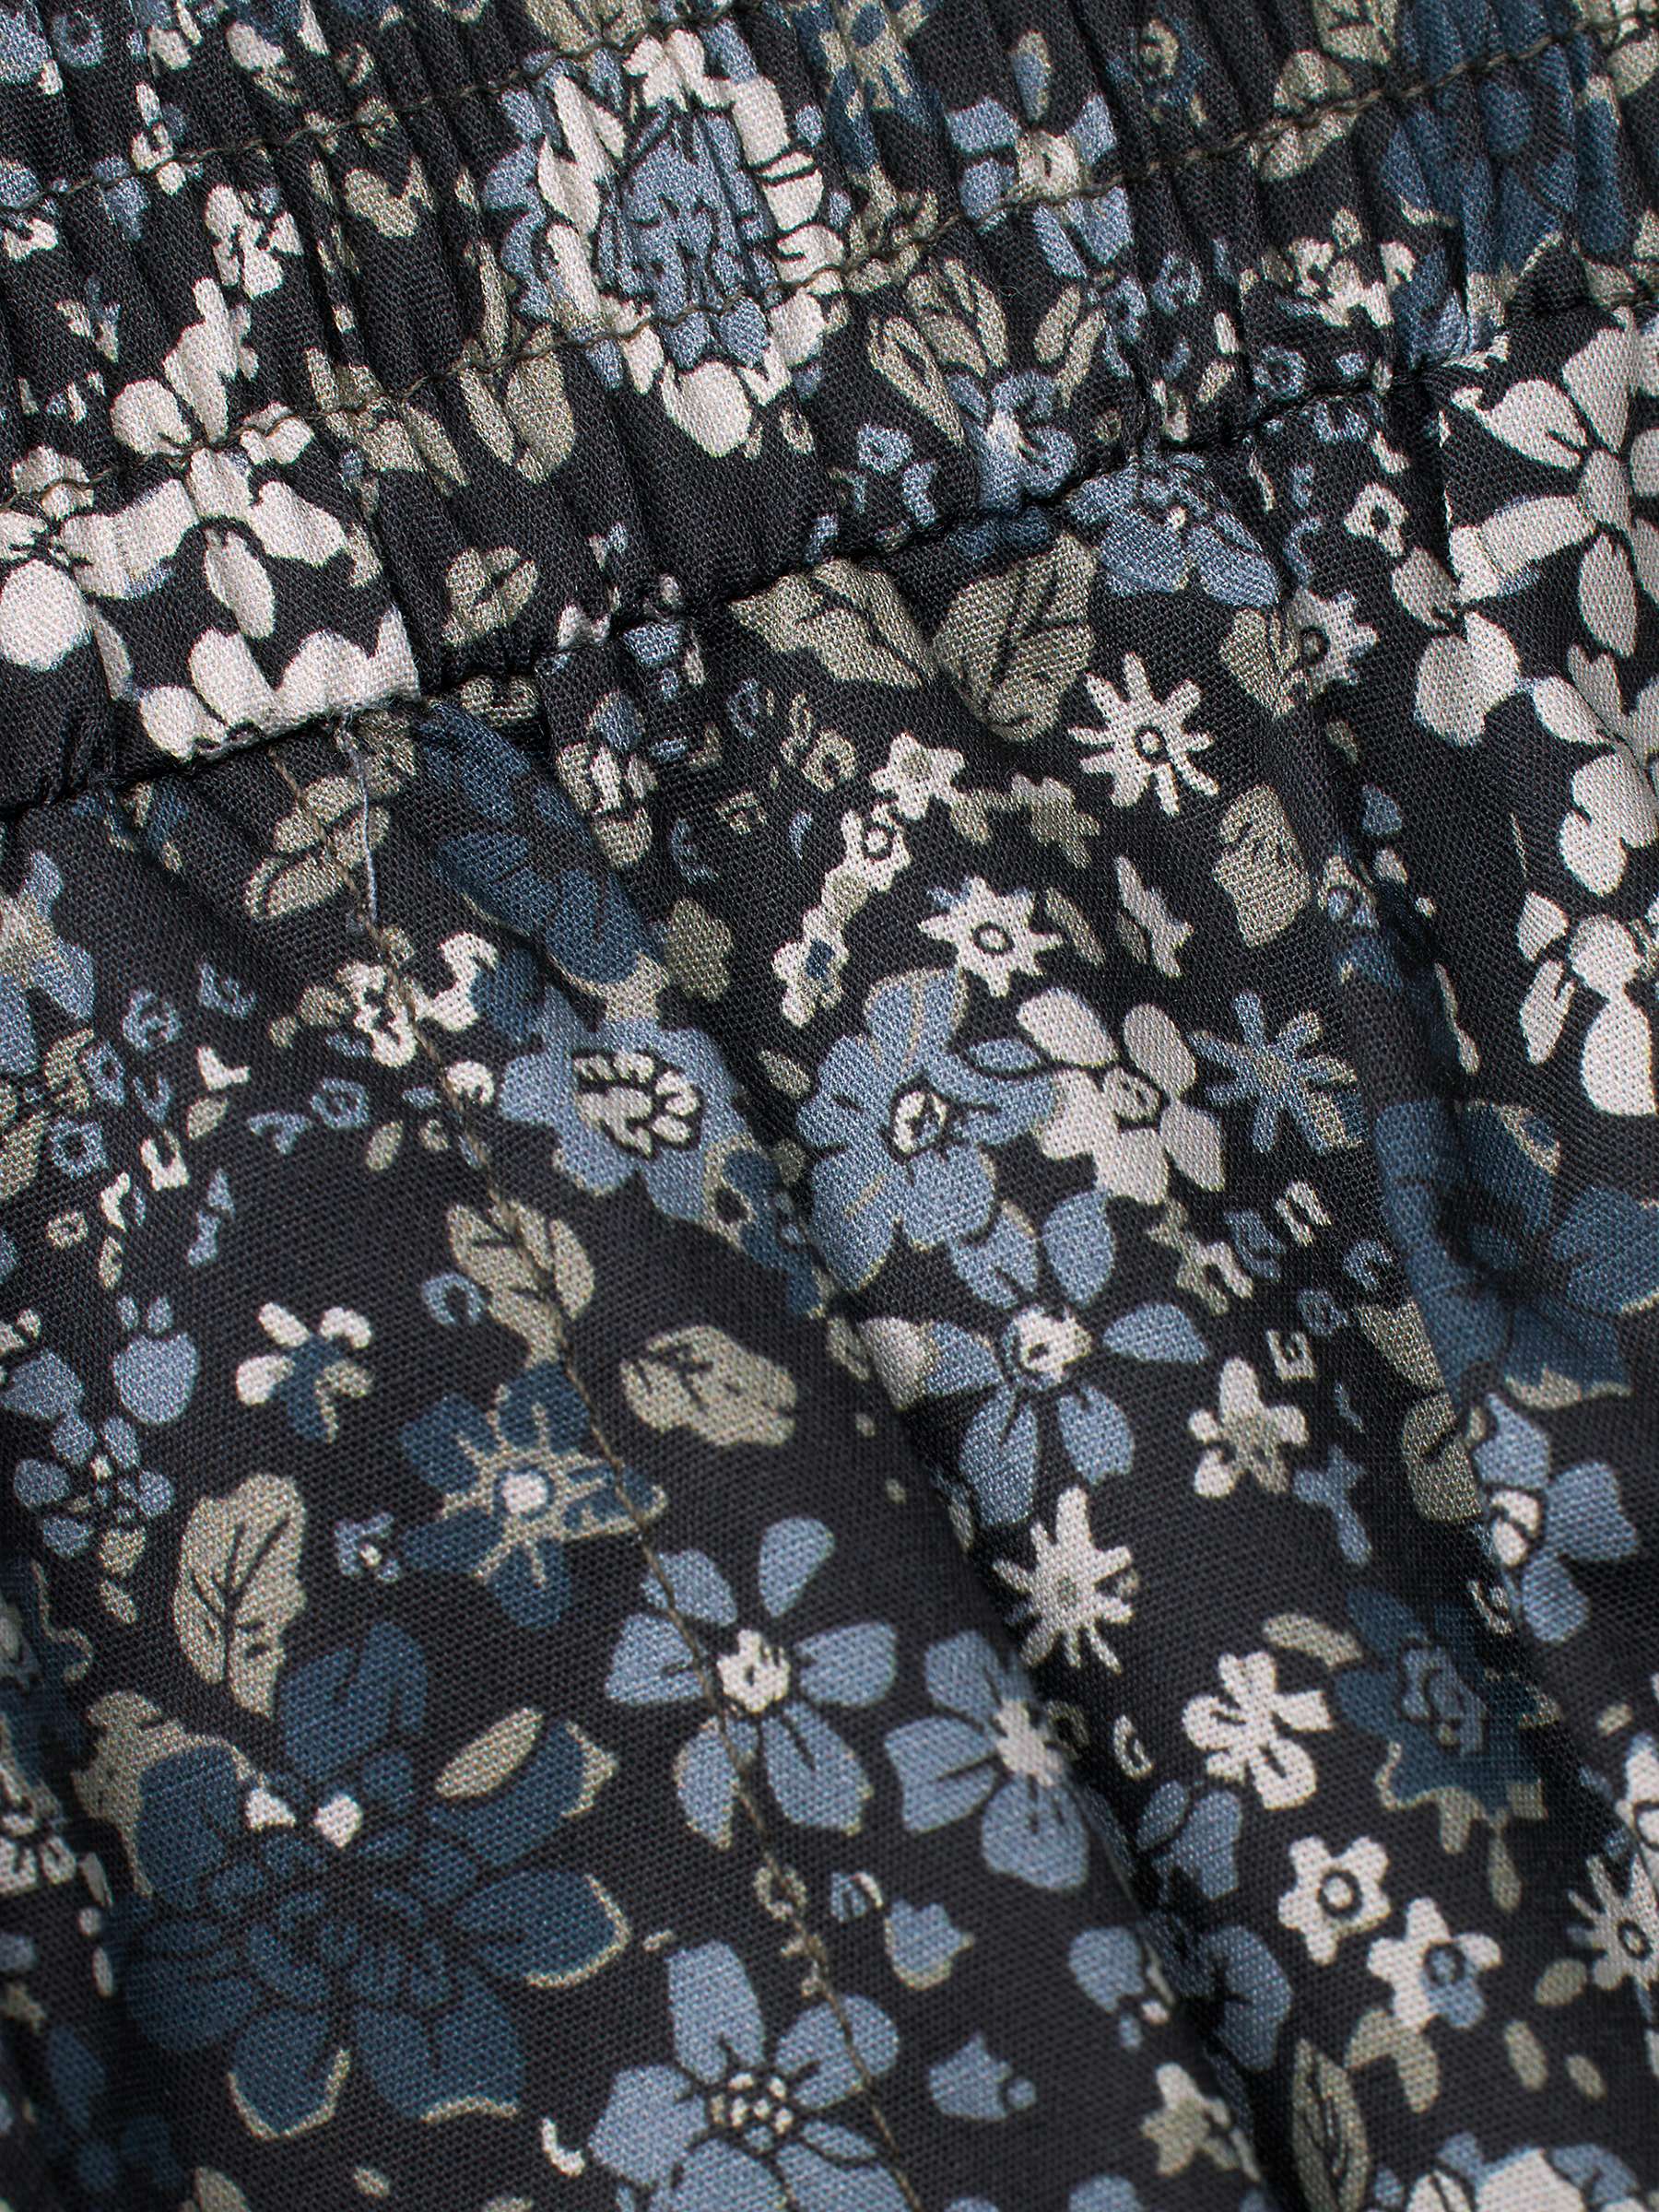 Buy Lollys Laundry Bill Floral Trousers Online at johnlewis.com